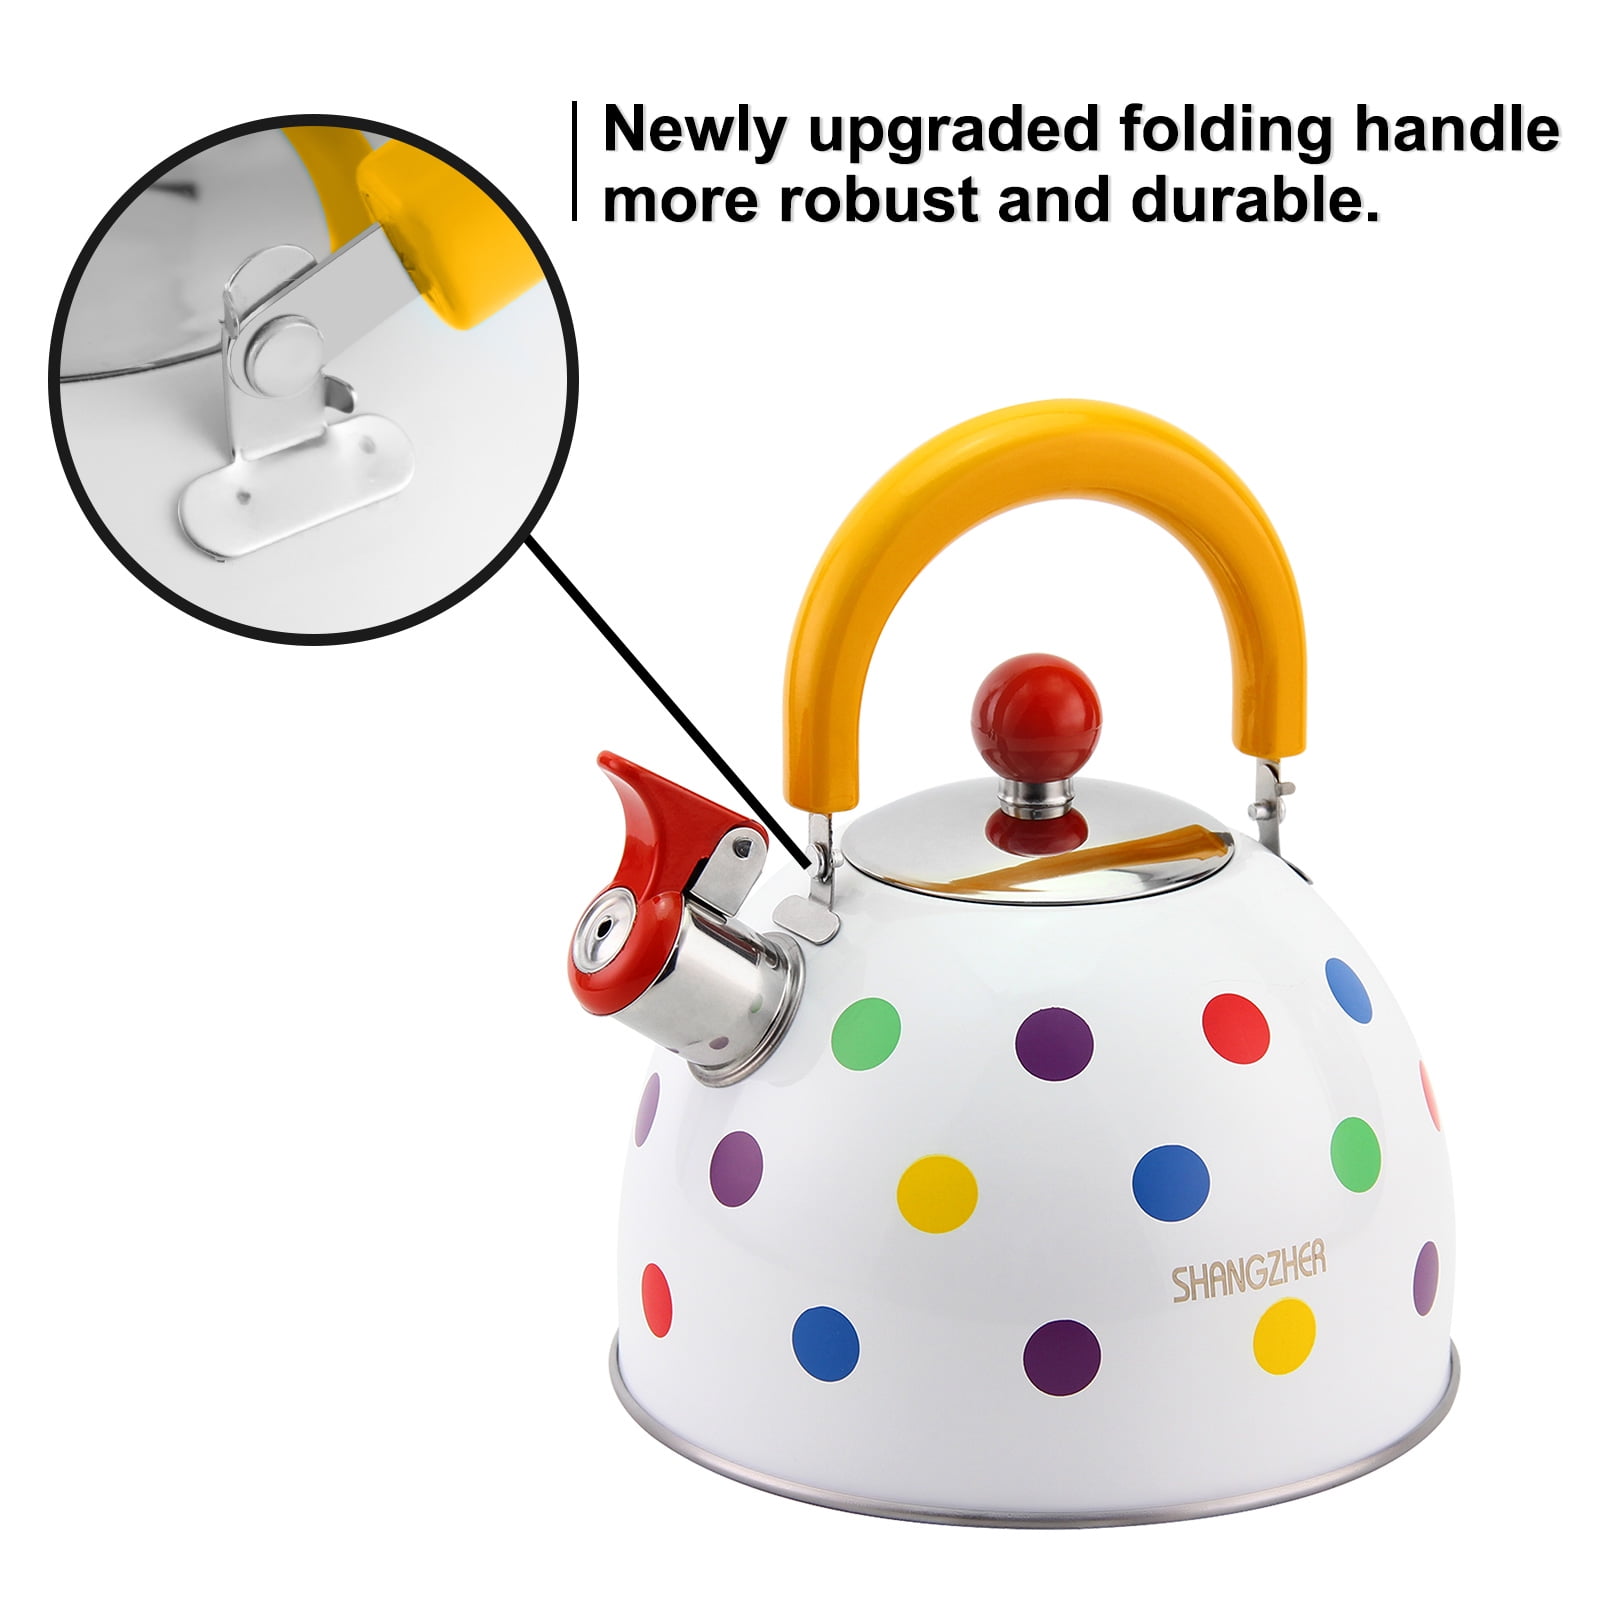 Home-X Santa Claus Whistling Kettle, Porcelain Coated Steel Kettle for Boiling Water, Cute Red Teapot, 2-Liter Capacity, 9 L x 7 W x 9 H